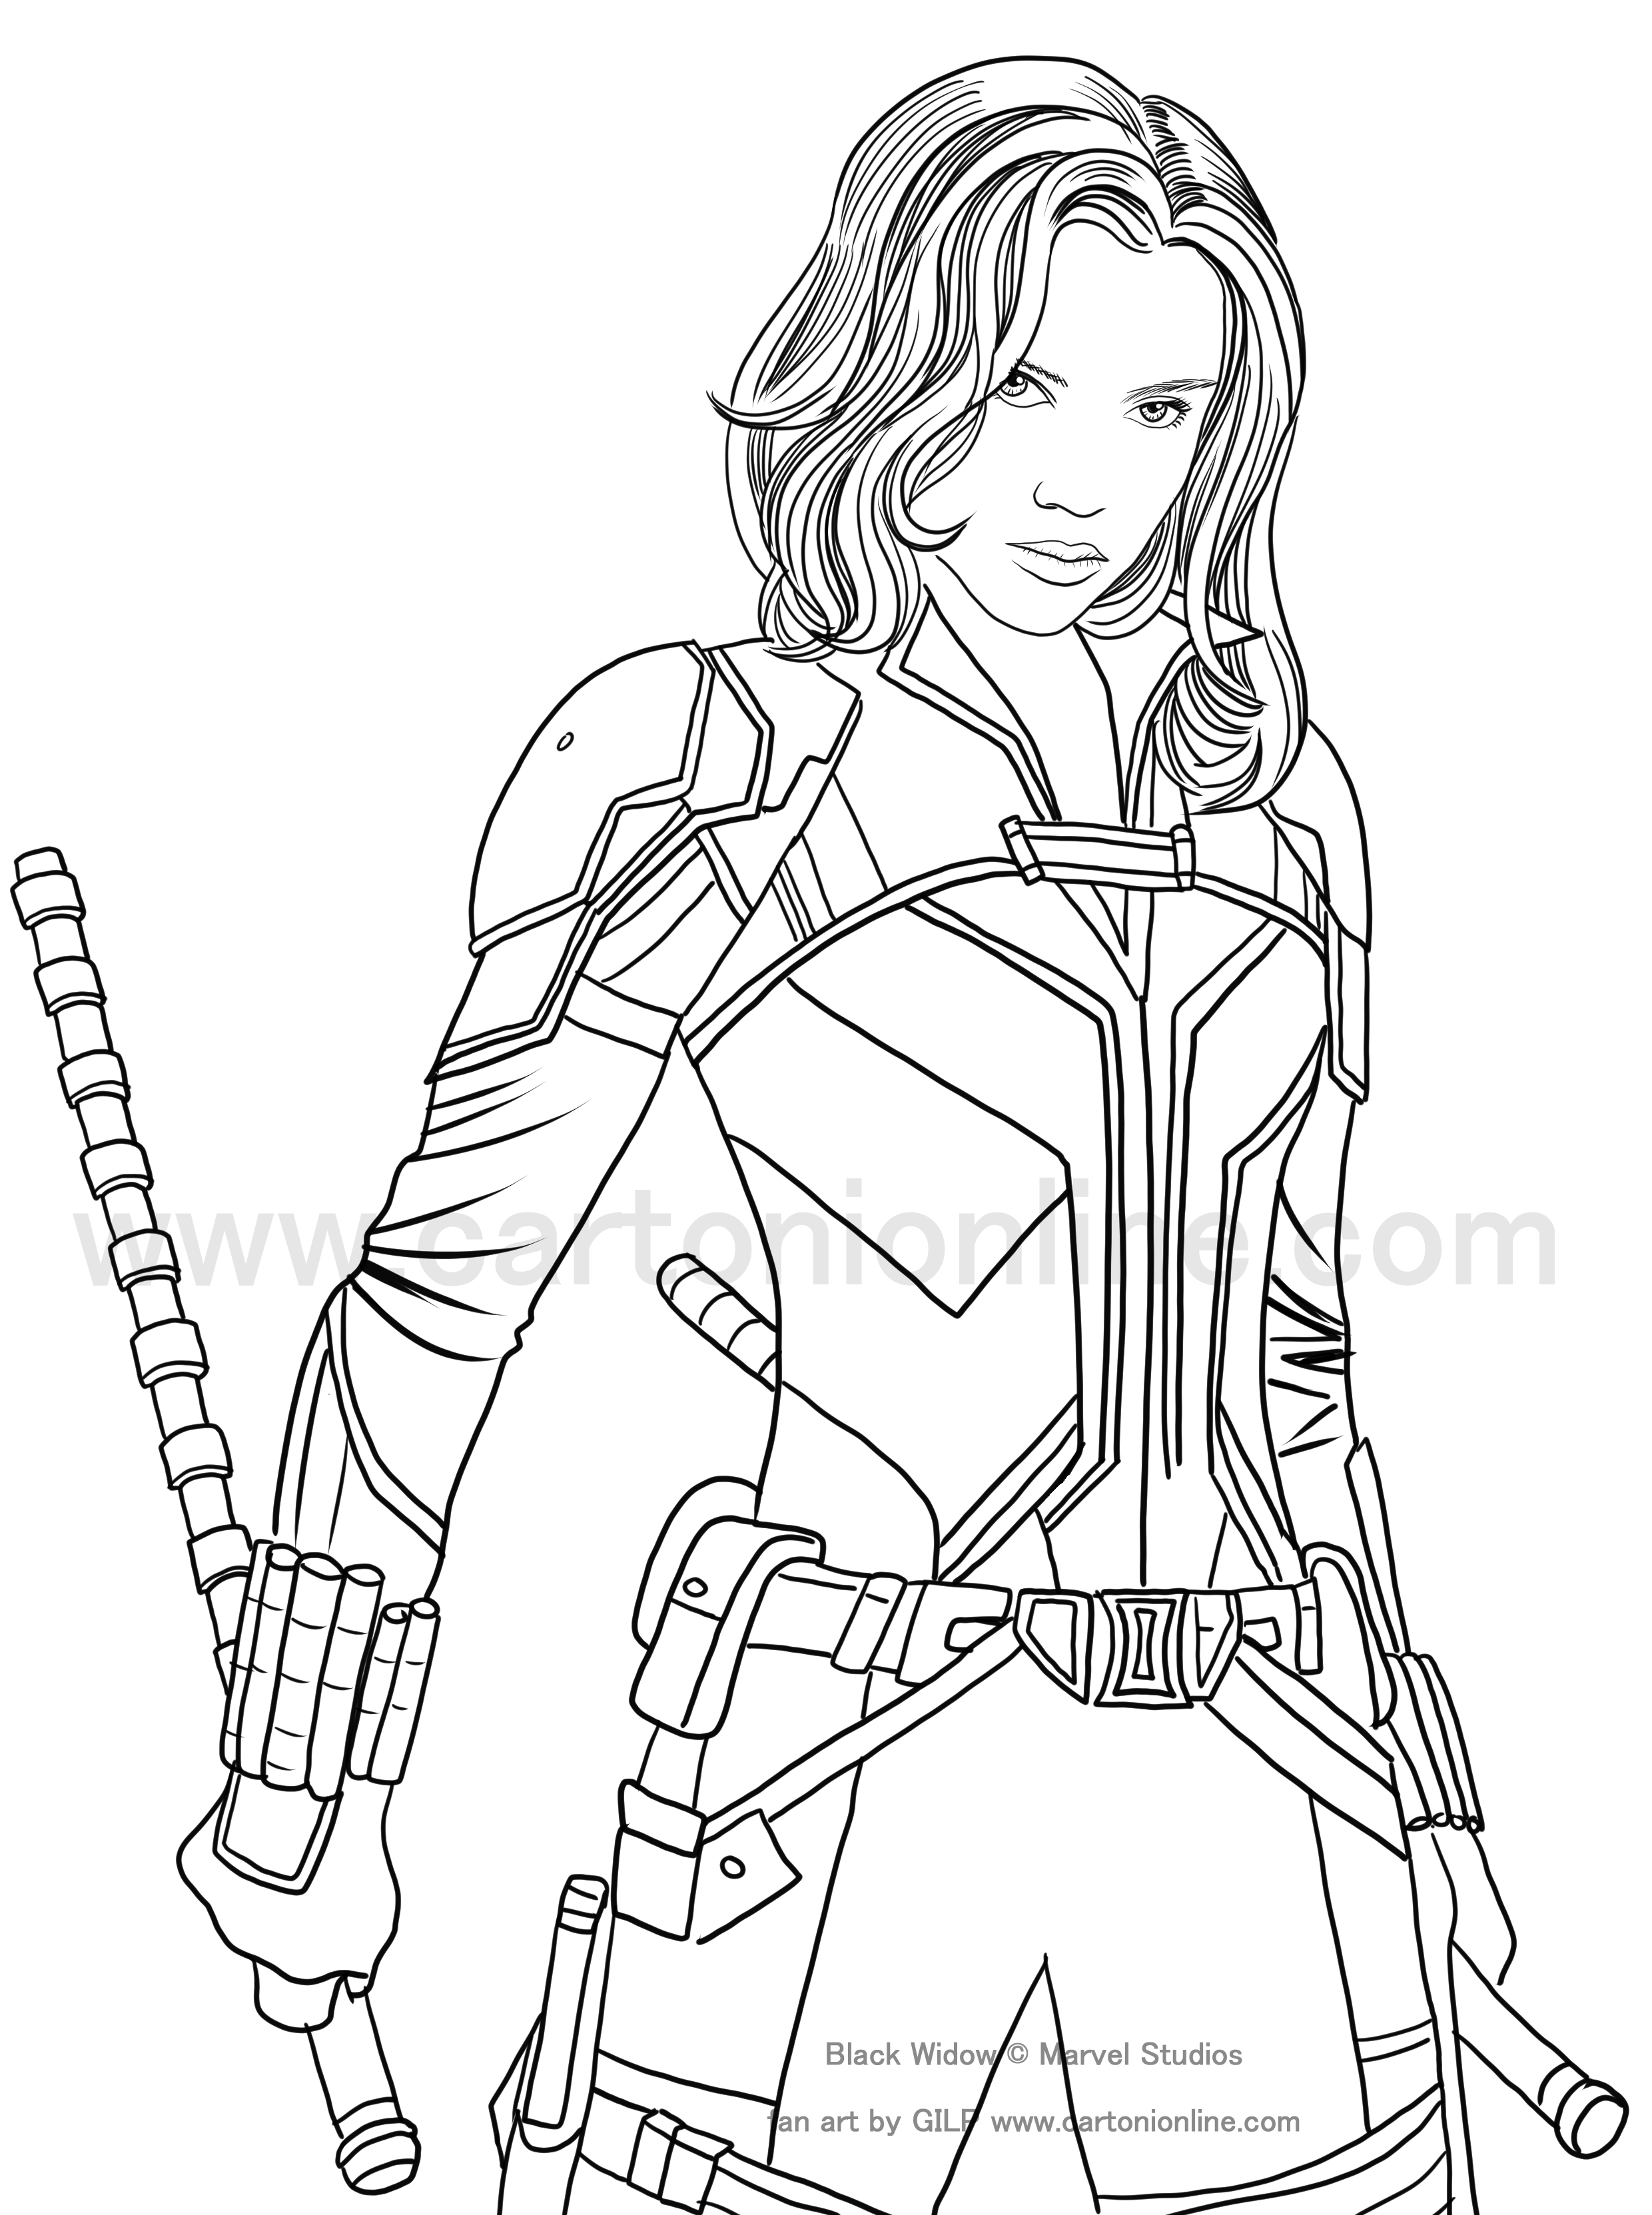 coloring-pages-black-widow